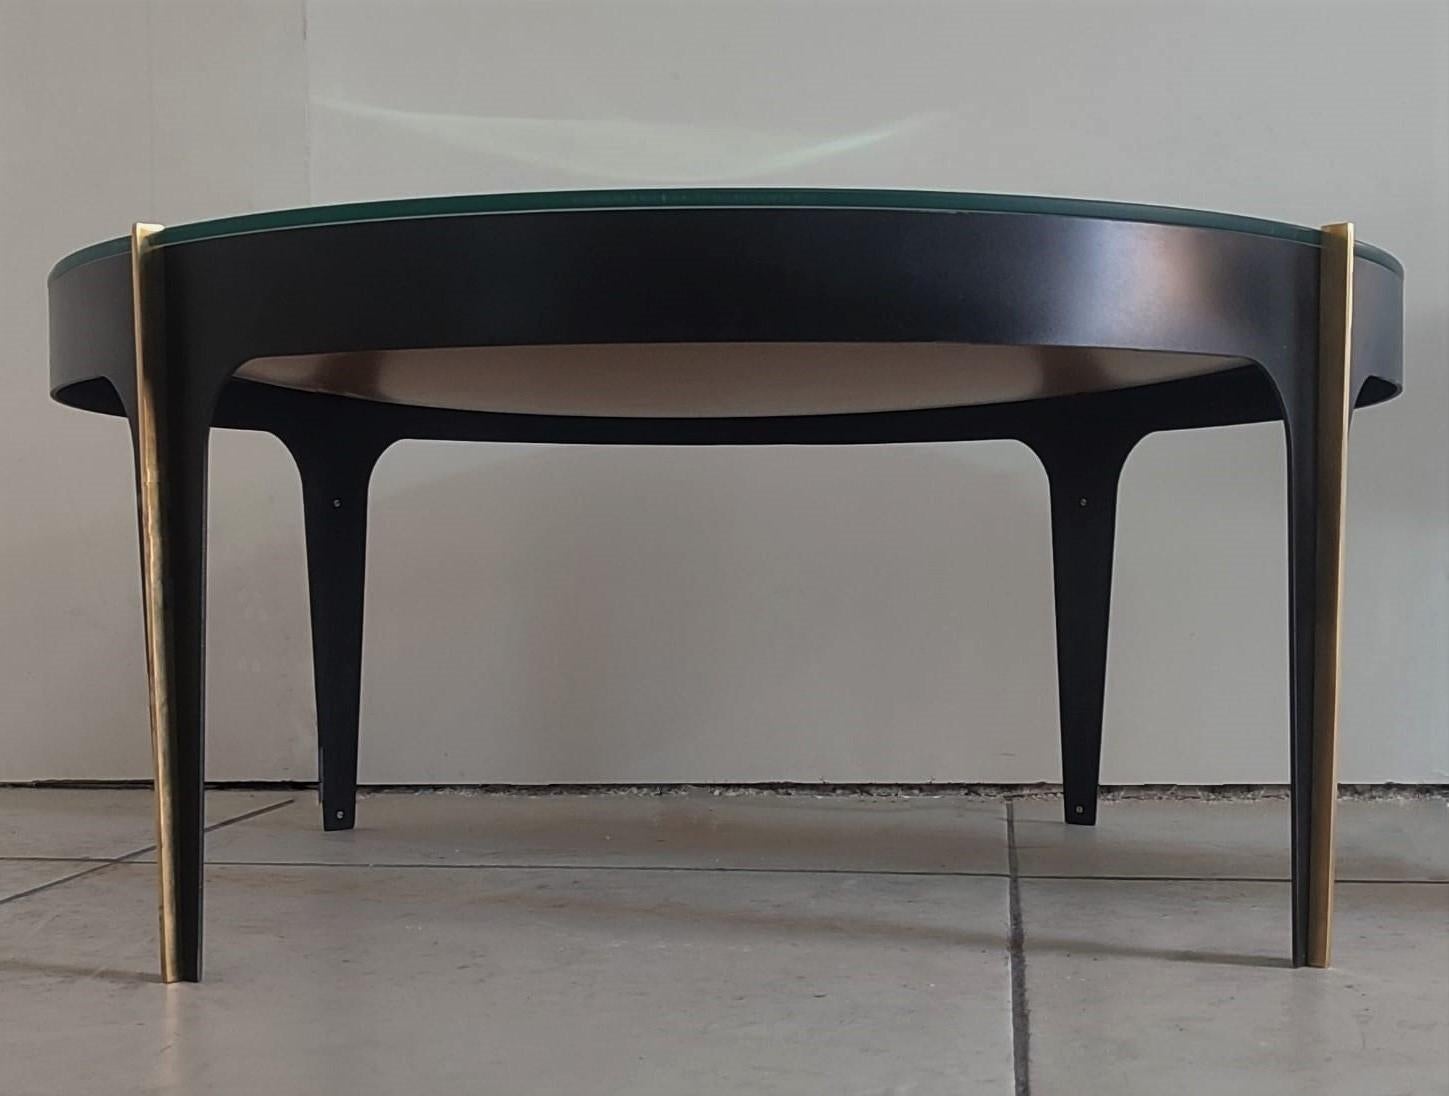 Max Ingrand Coffee Table for Fontana Arte, Mod. 1774, Italy, circa 1958 In Good Condition For Sale In Frankfurt am Main, DE